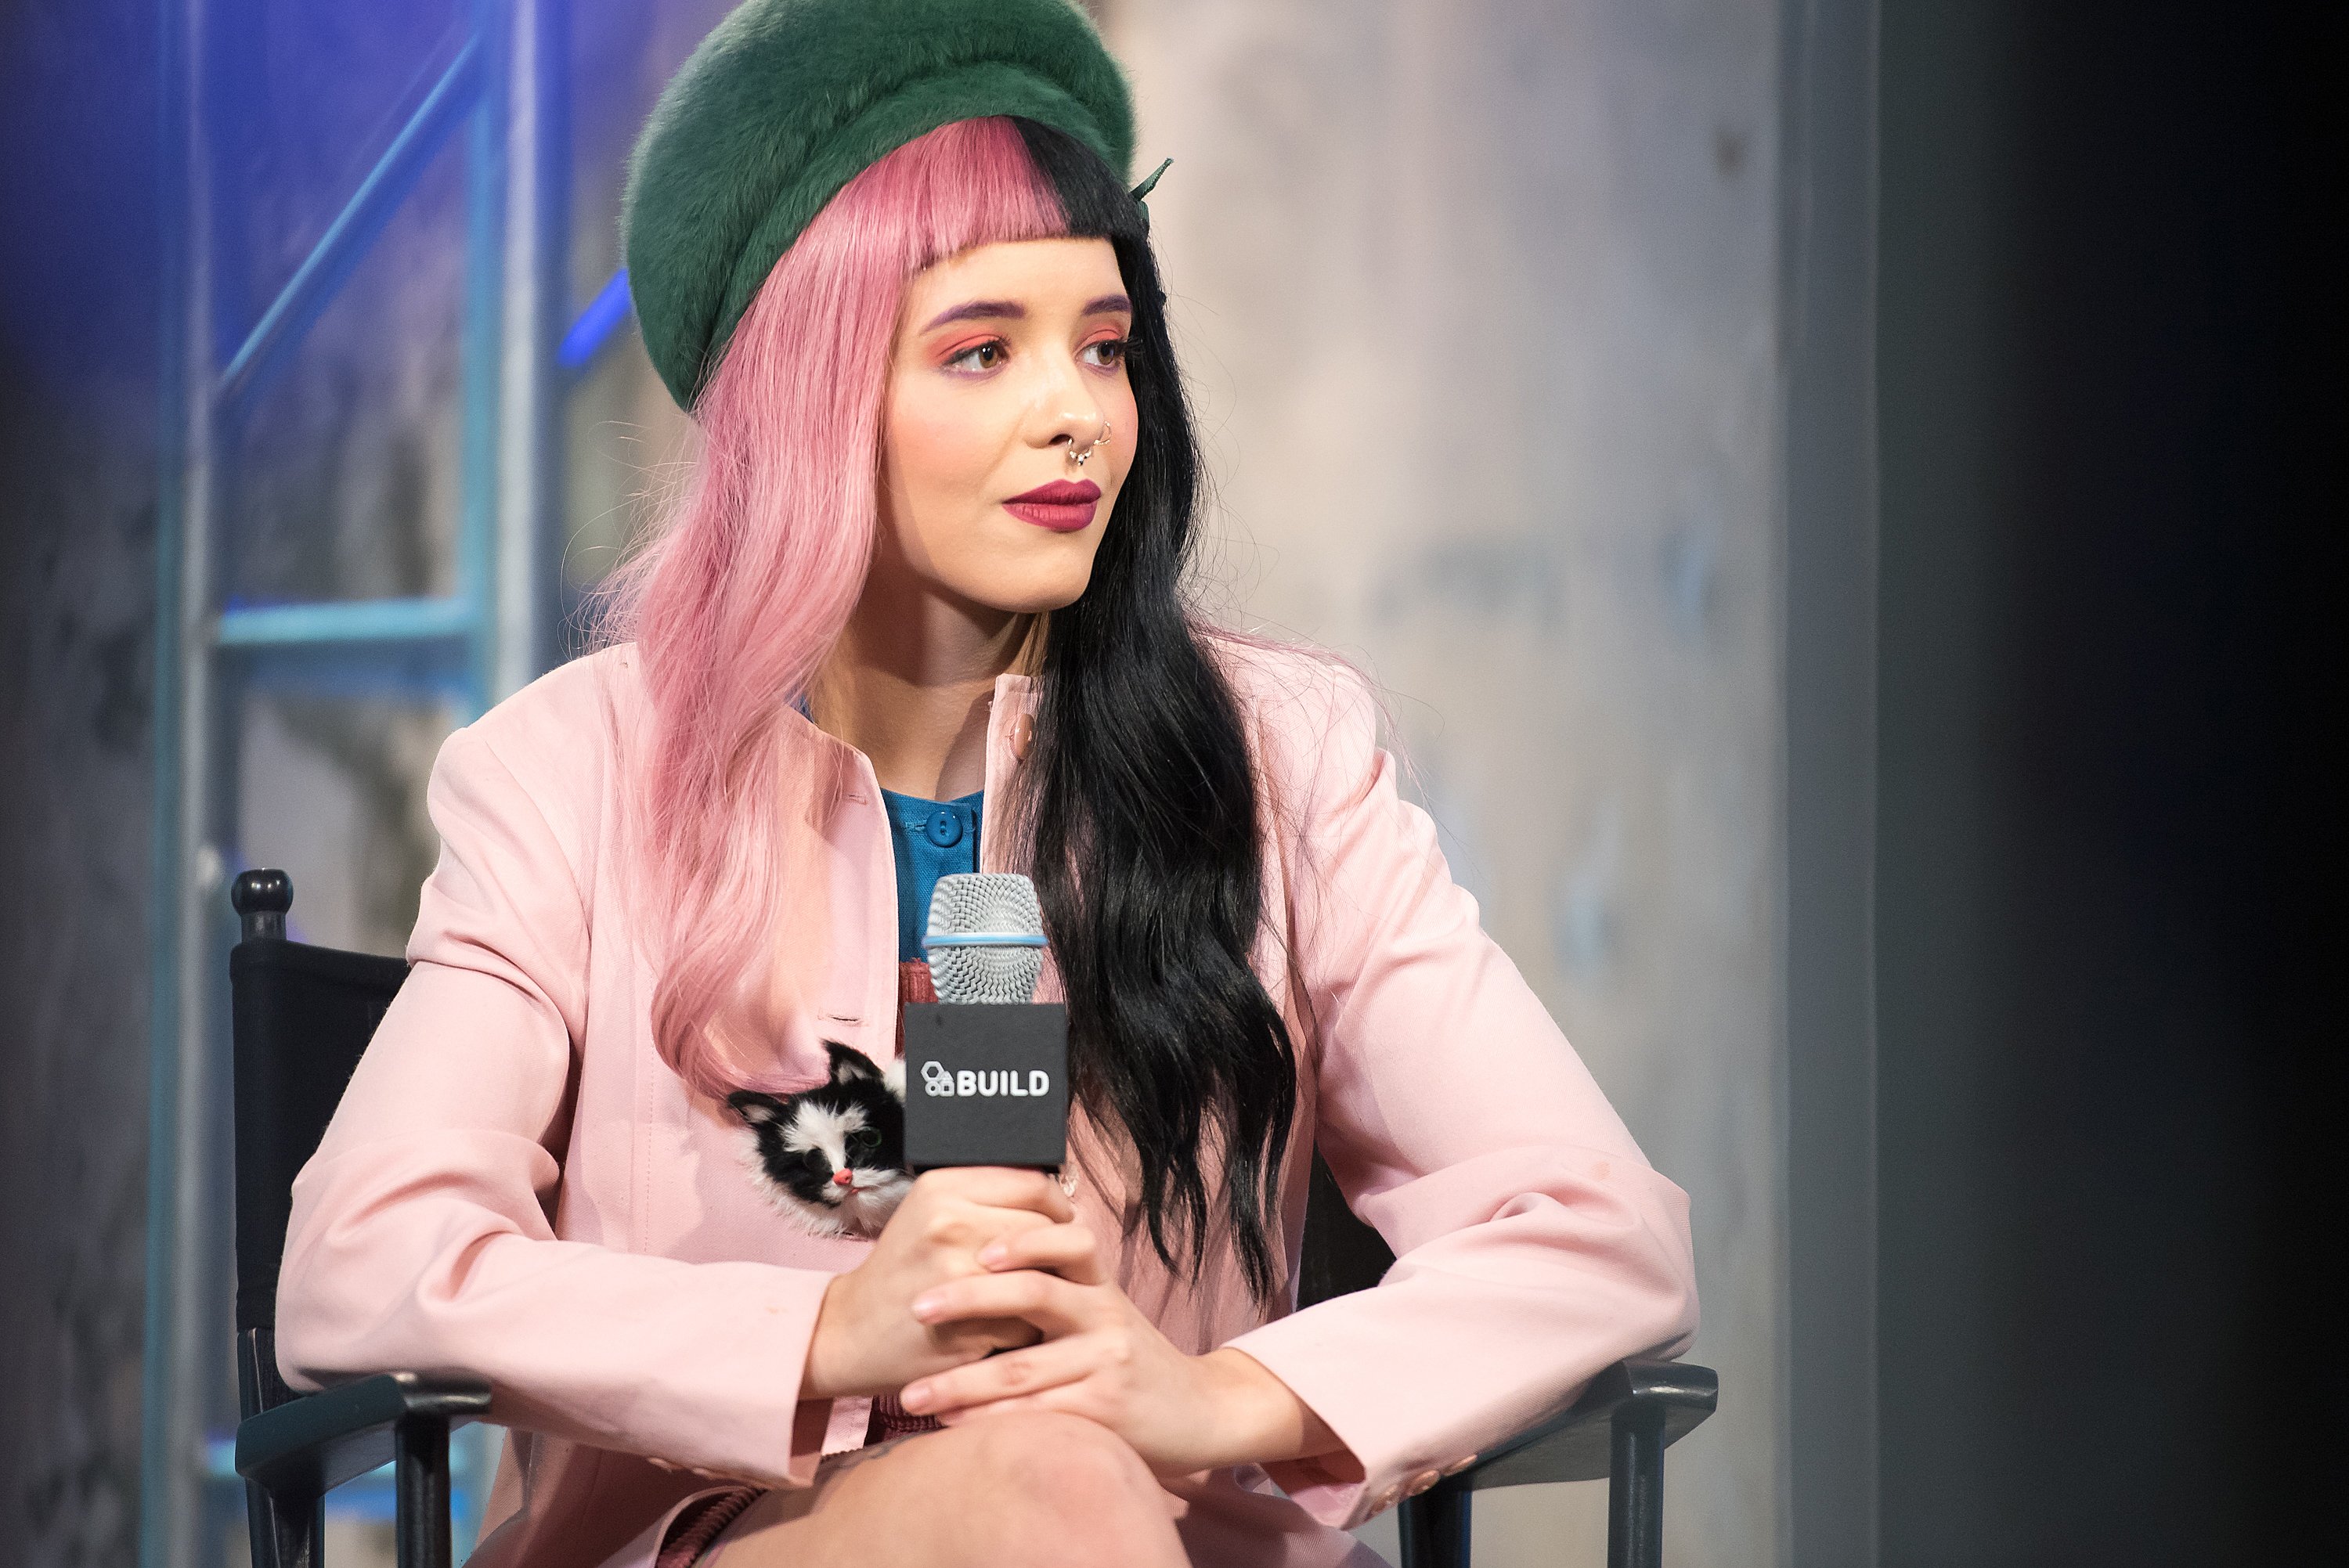 Singer Melanie Martinez attends the AOL Build Speaker Series at AOL Studios, in New York, on March 25, 2016, in New York City. | Source: Getty Images